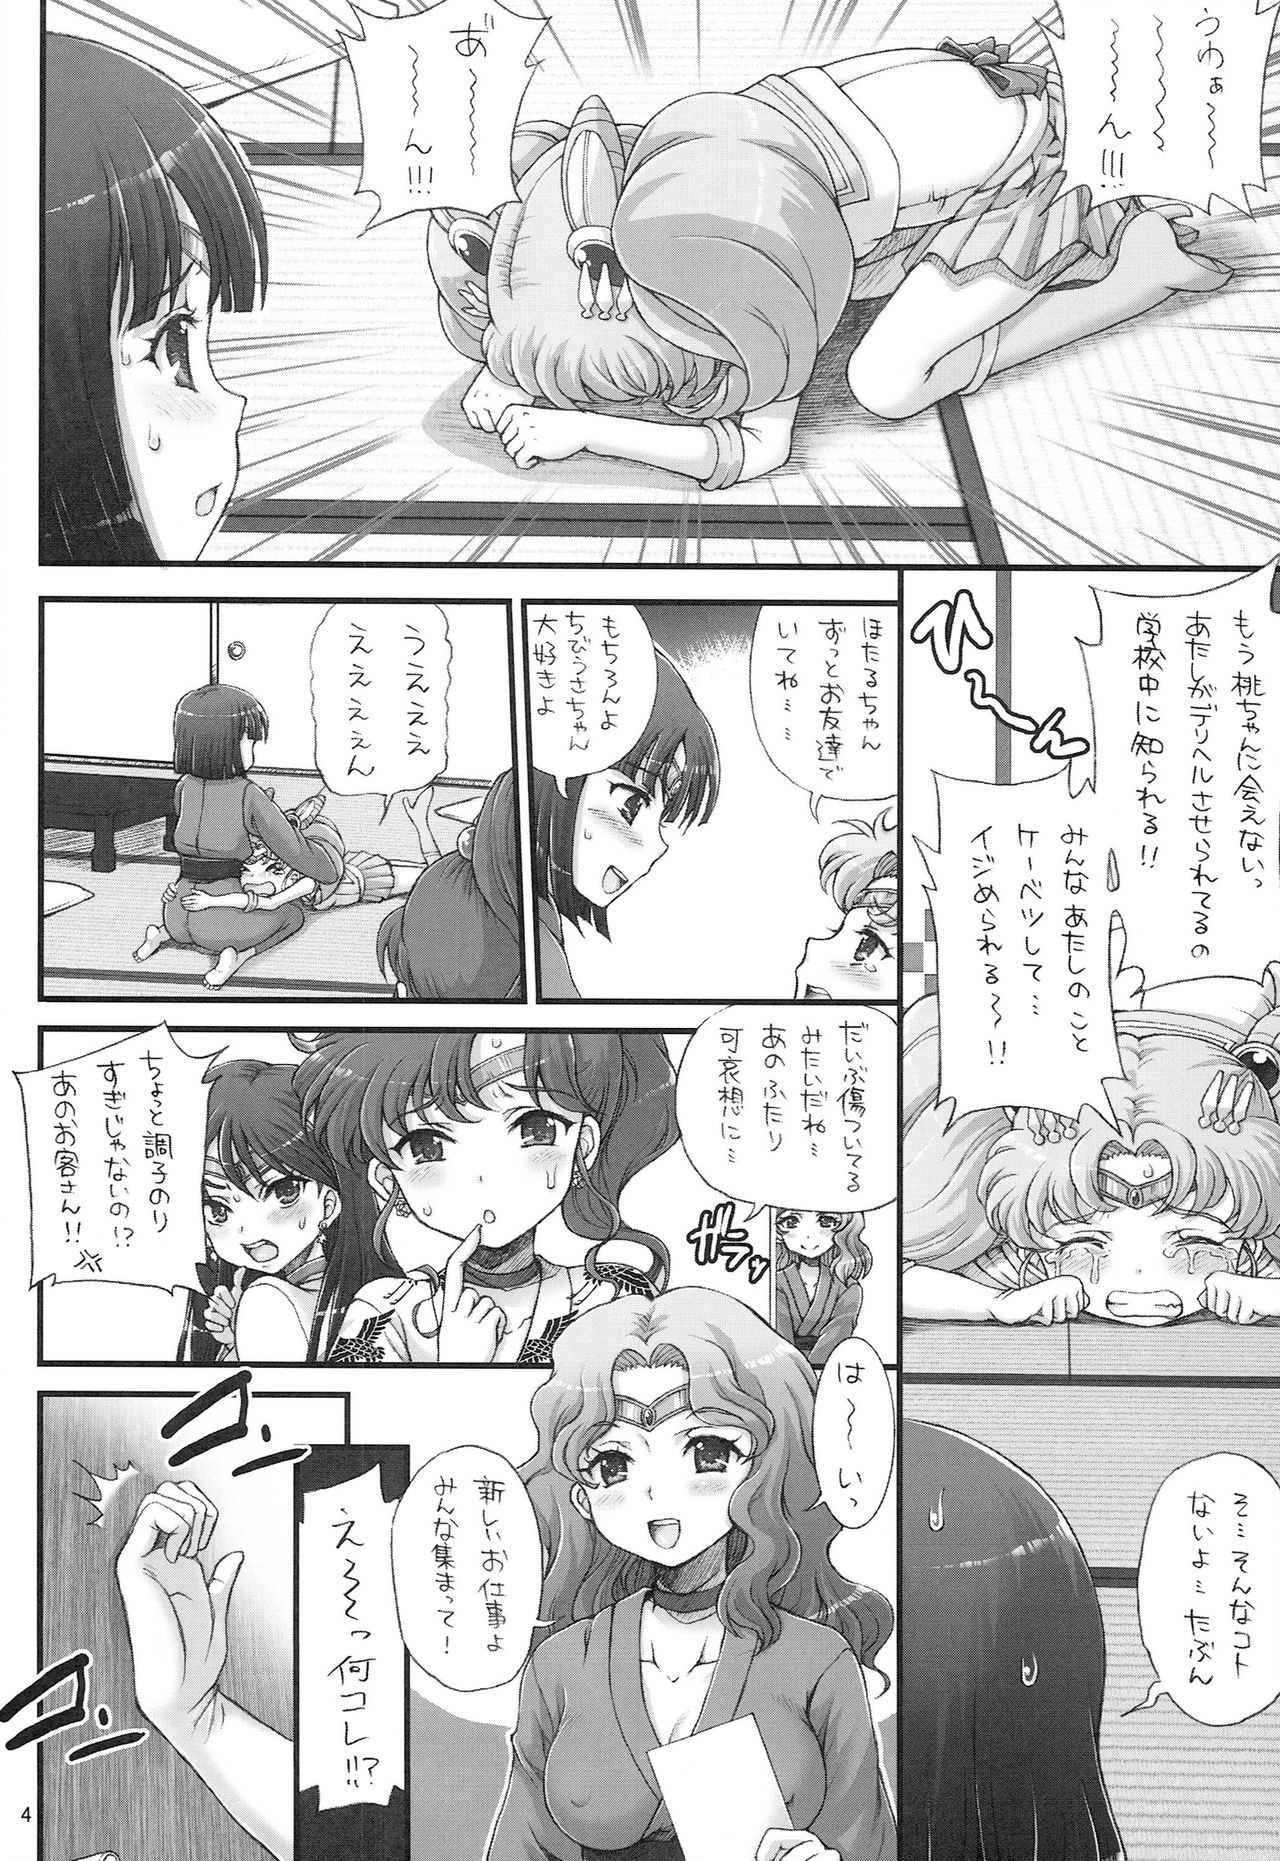 Sailor Delivery Health AS hentai manga picture 3